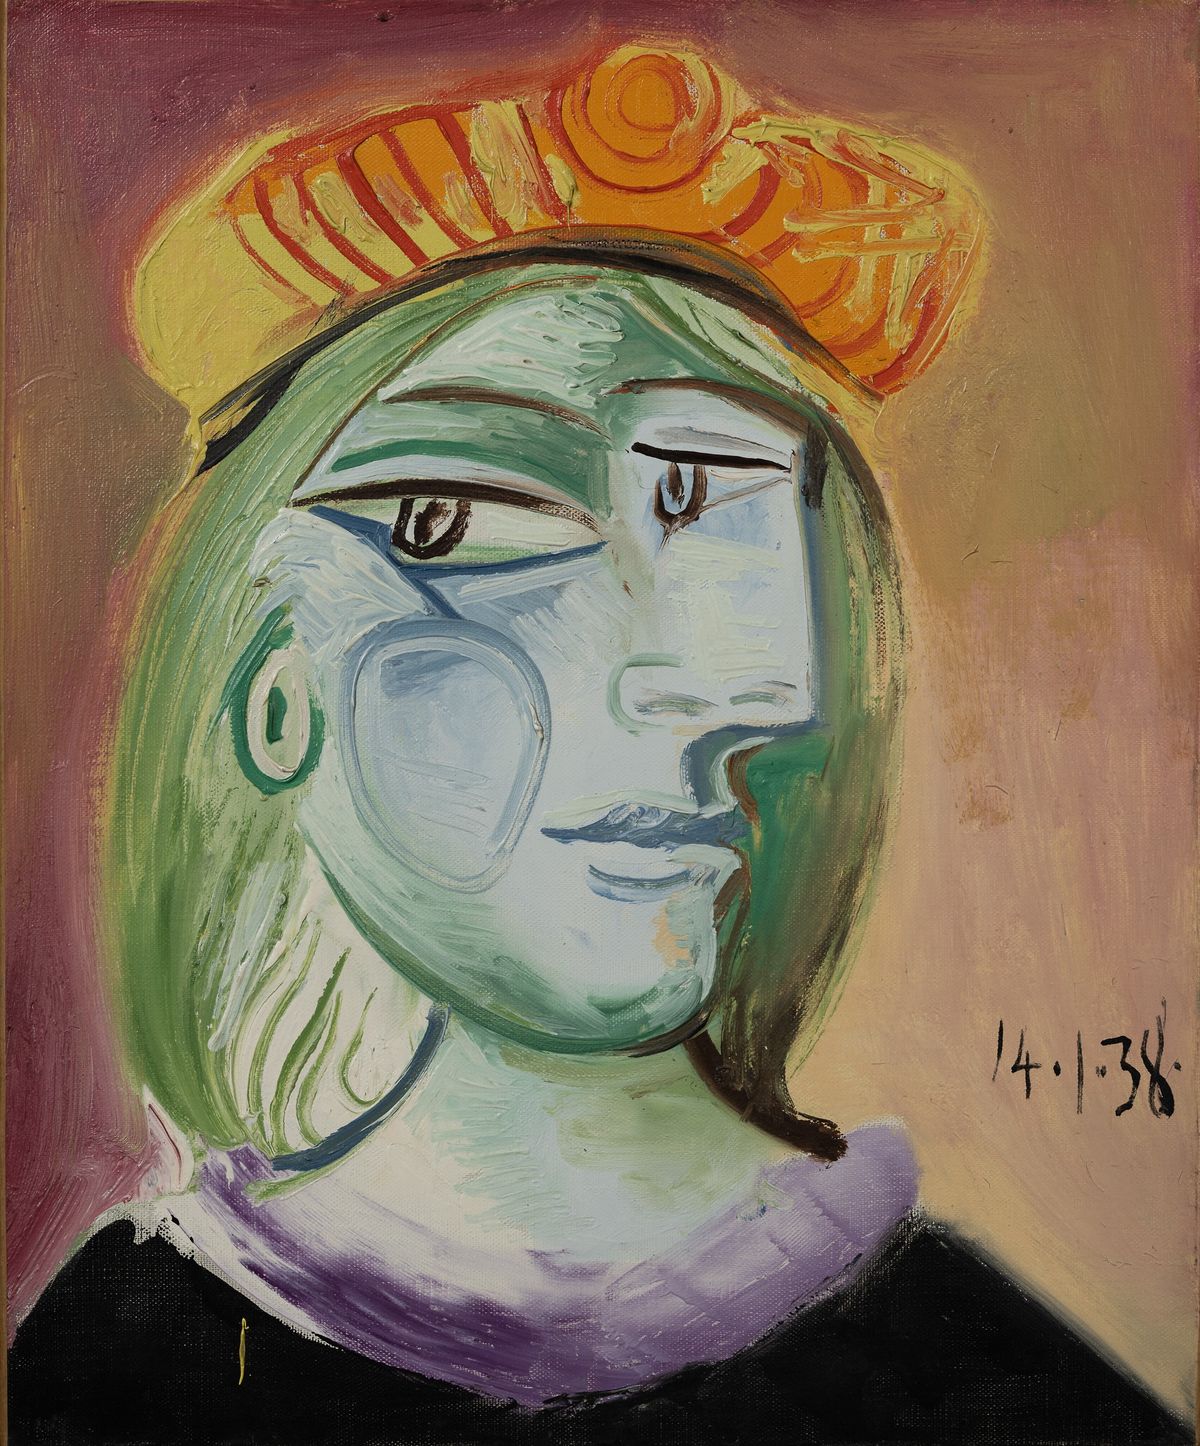 Femme au béret rouge-orange (1938) Images courtesy Sotheby’s & MGM Resorts. © 2021 Estate of Pablo Picasso / Artists Rights Society (ARS), New York